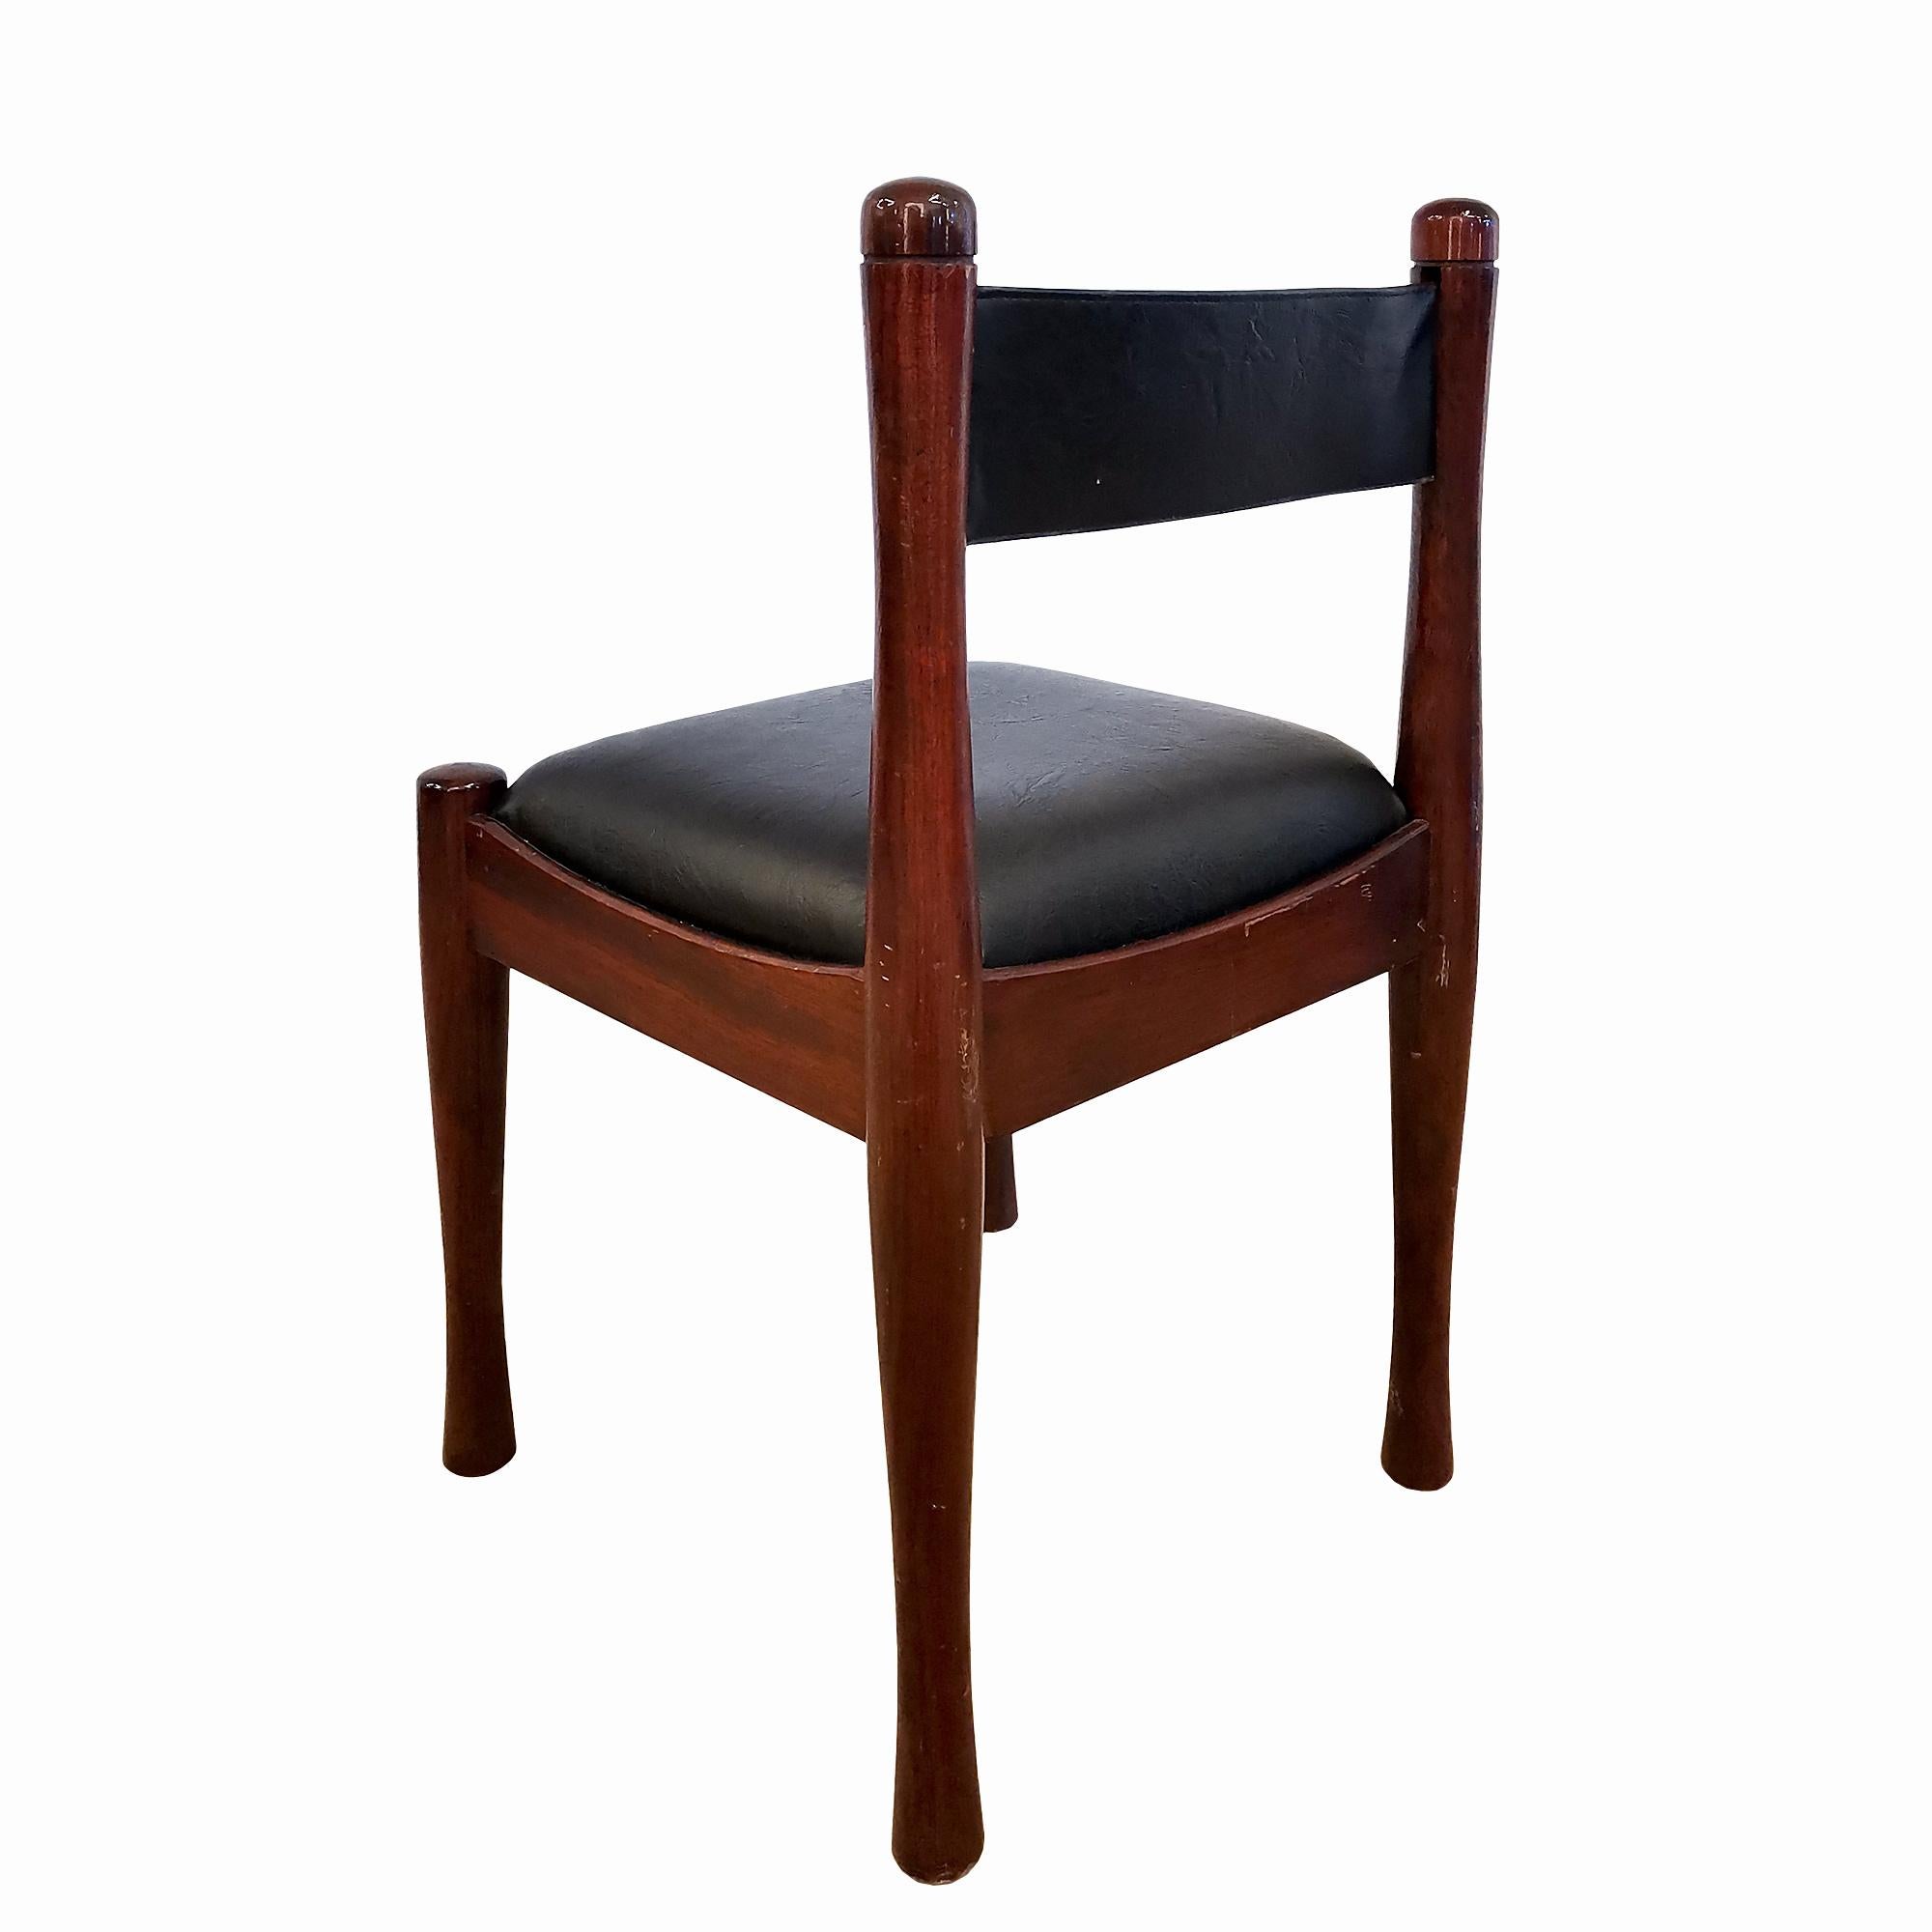 Faux Leather Set of Mid-Century Modern Chairs in Mahogany by Silvio Coppola - Italy, 1970 For Sale